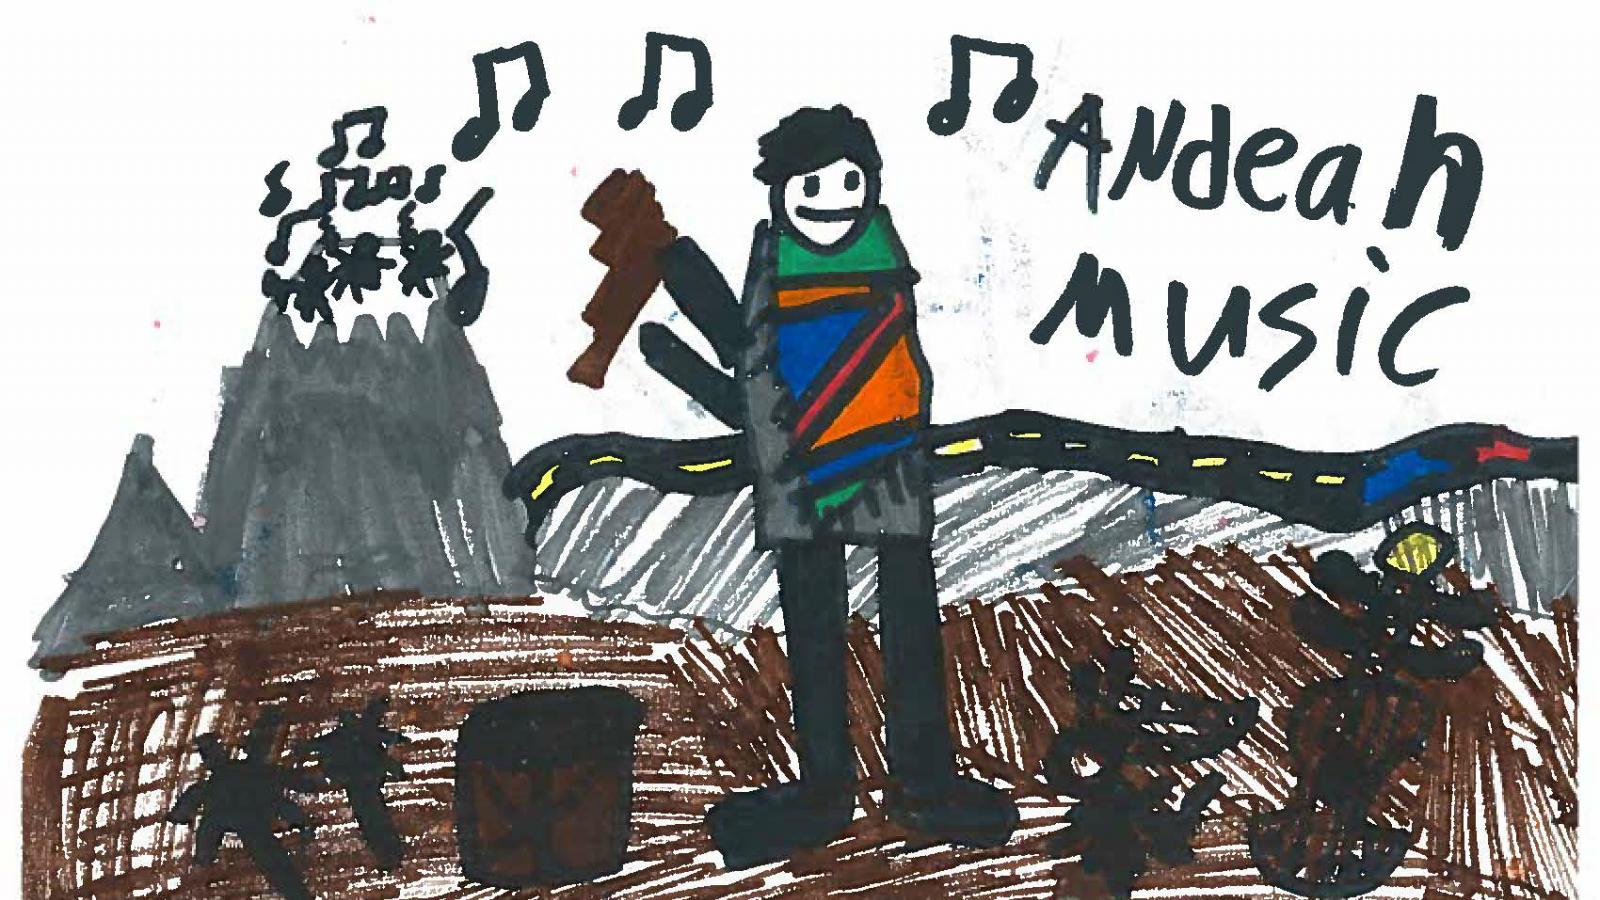 Letters to the OSU Andean Music Ensemble